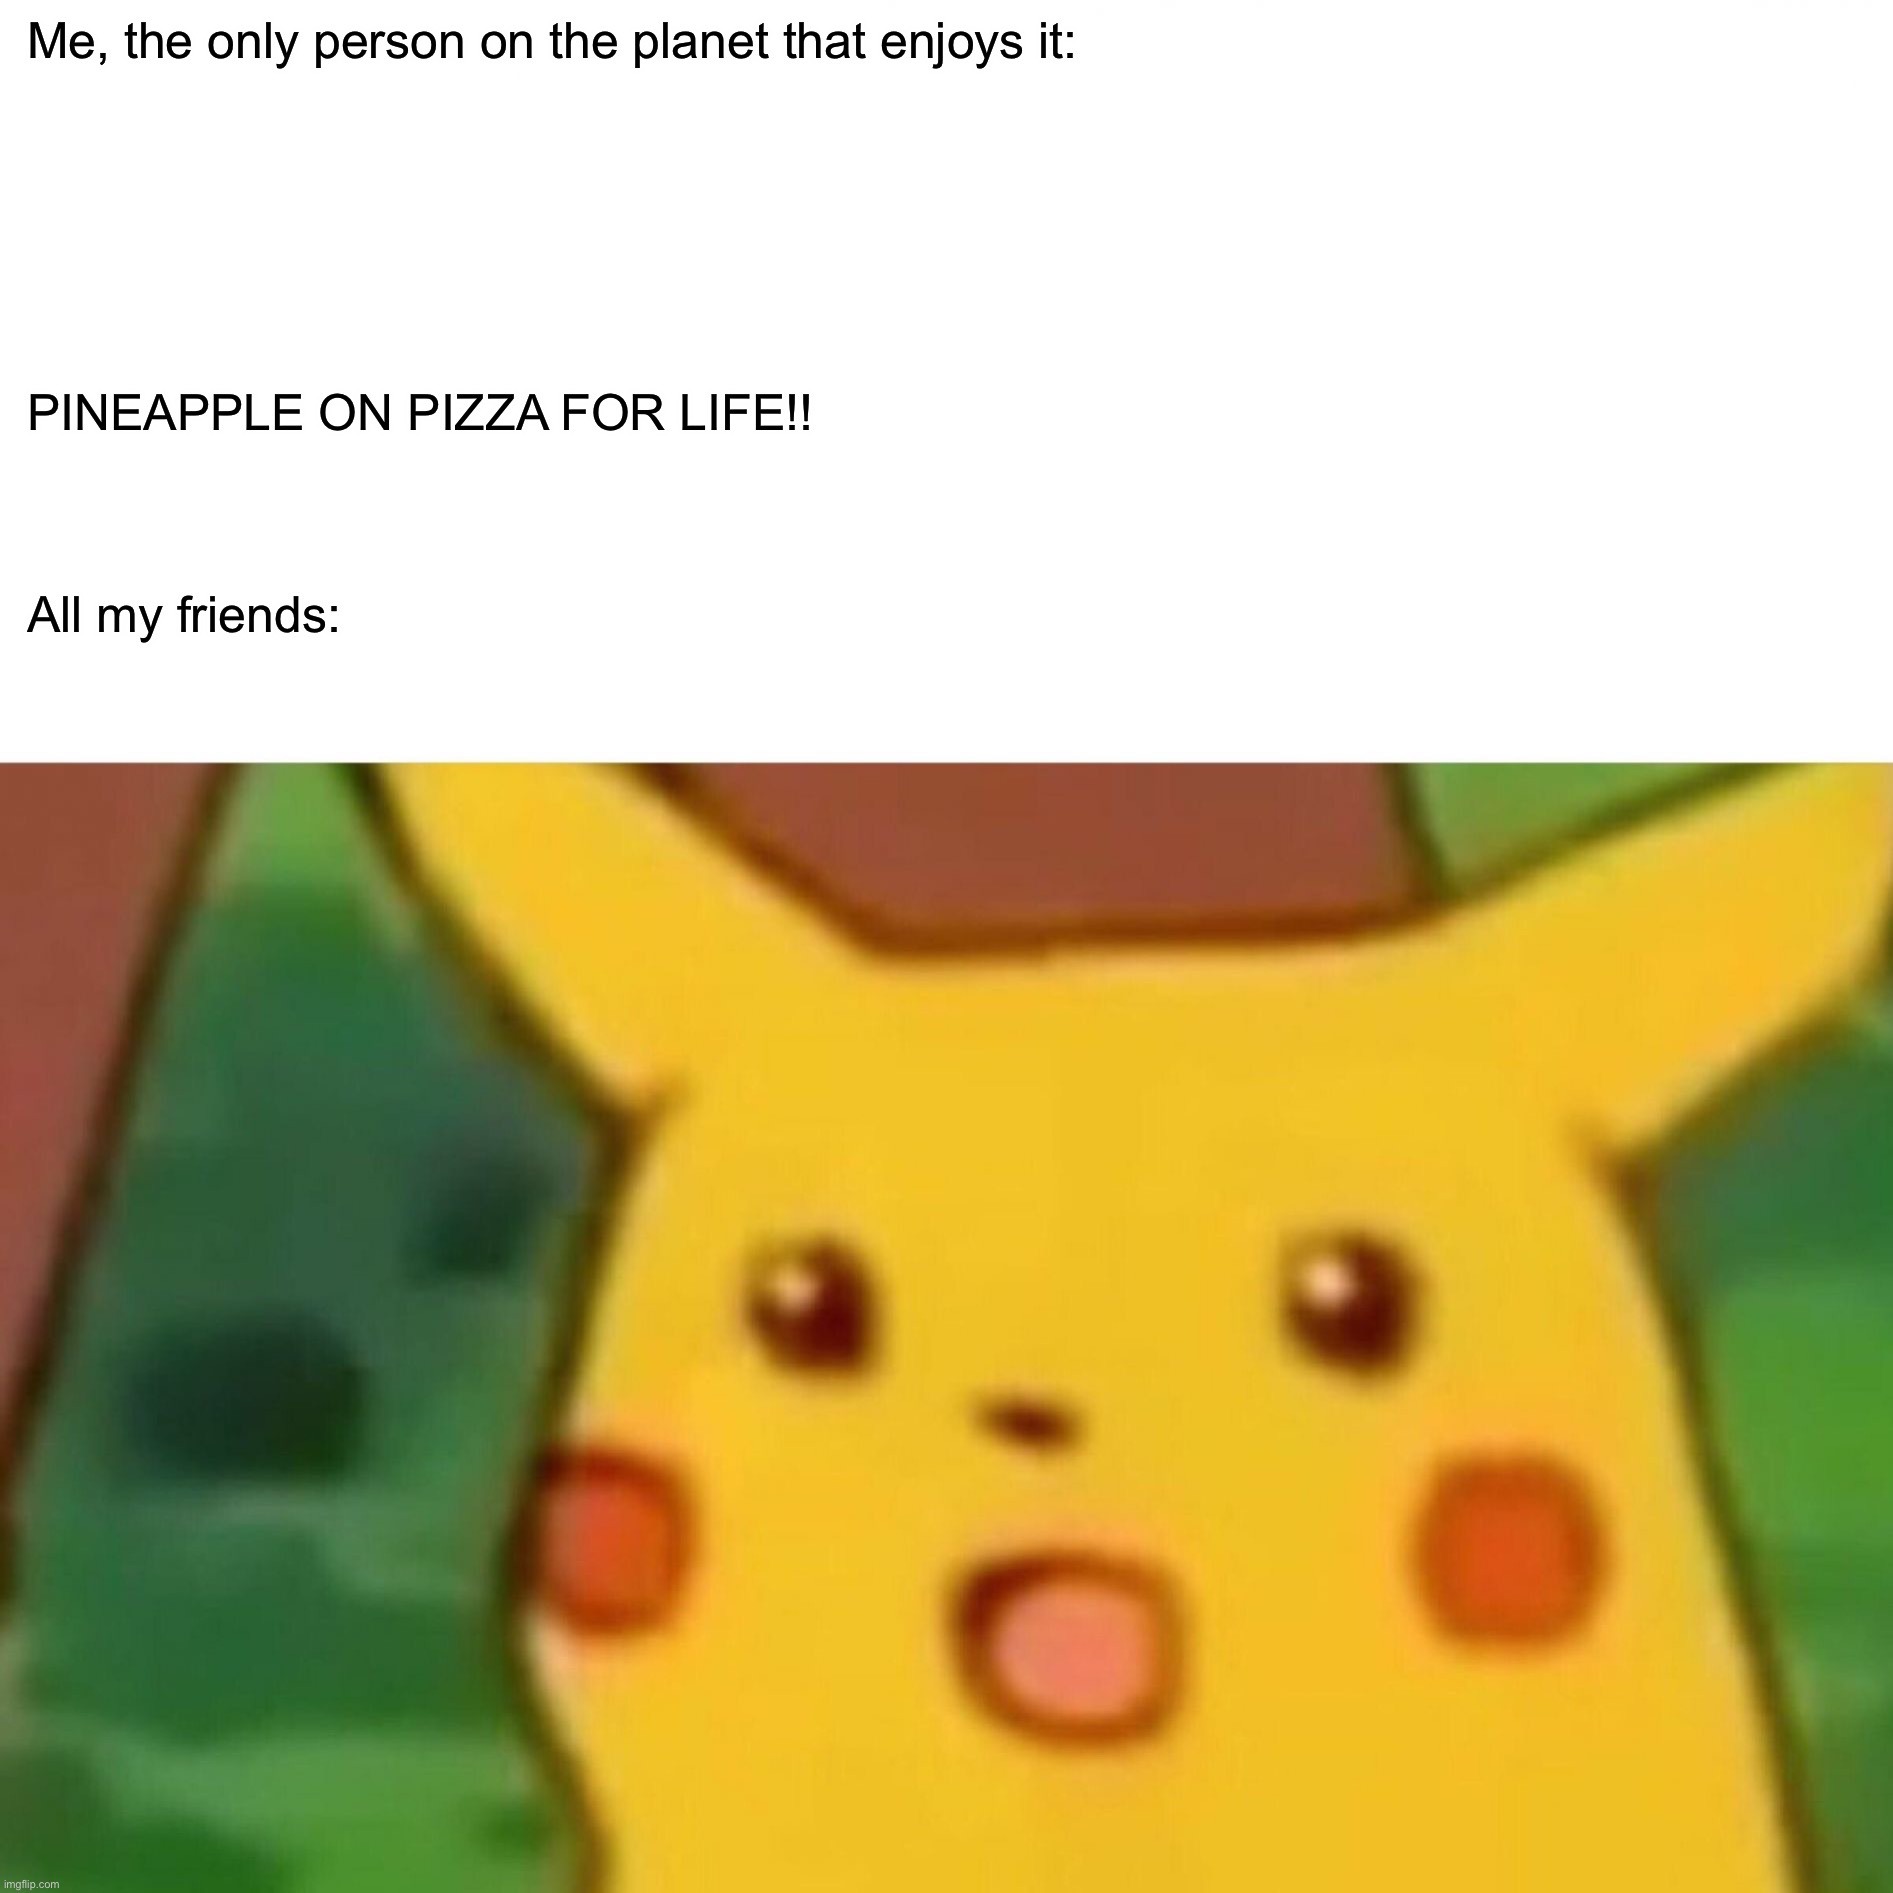 REEEEEE |  Me, the only person on the planet that enjoys it:; PINEAPPLE ON PIZZA FOR LIFE!! All my friends: | image tagged in memes,surprised pikachu | made w/ Imgflip meme maker